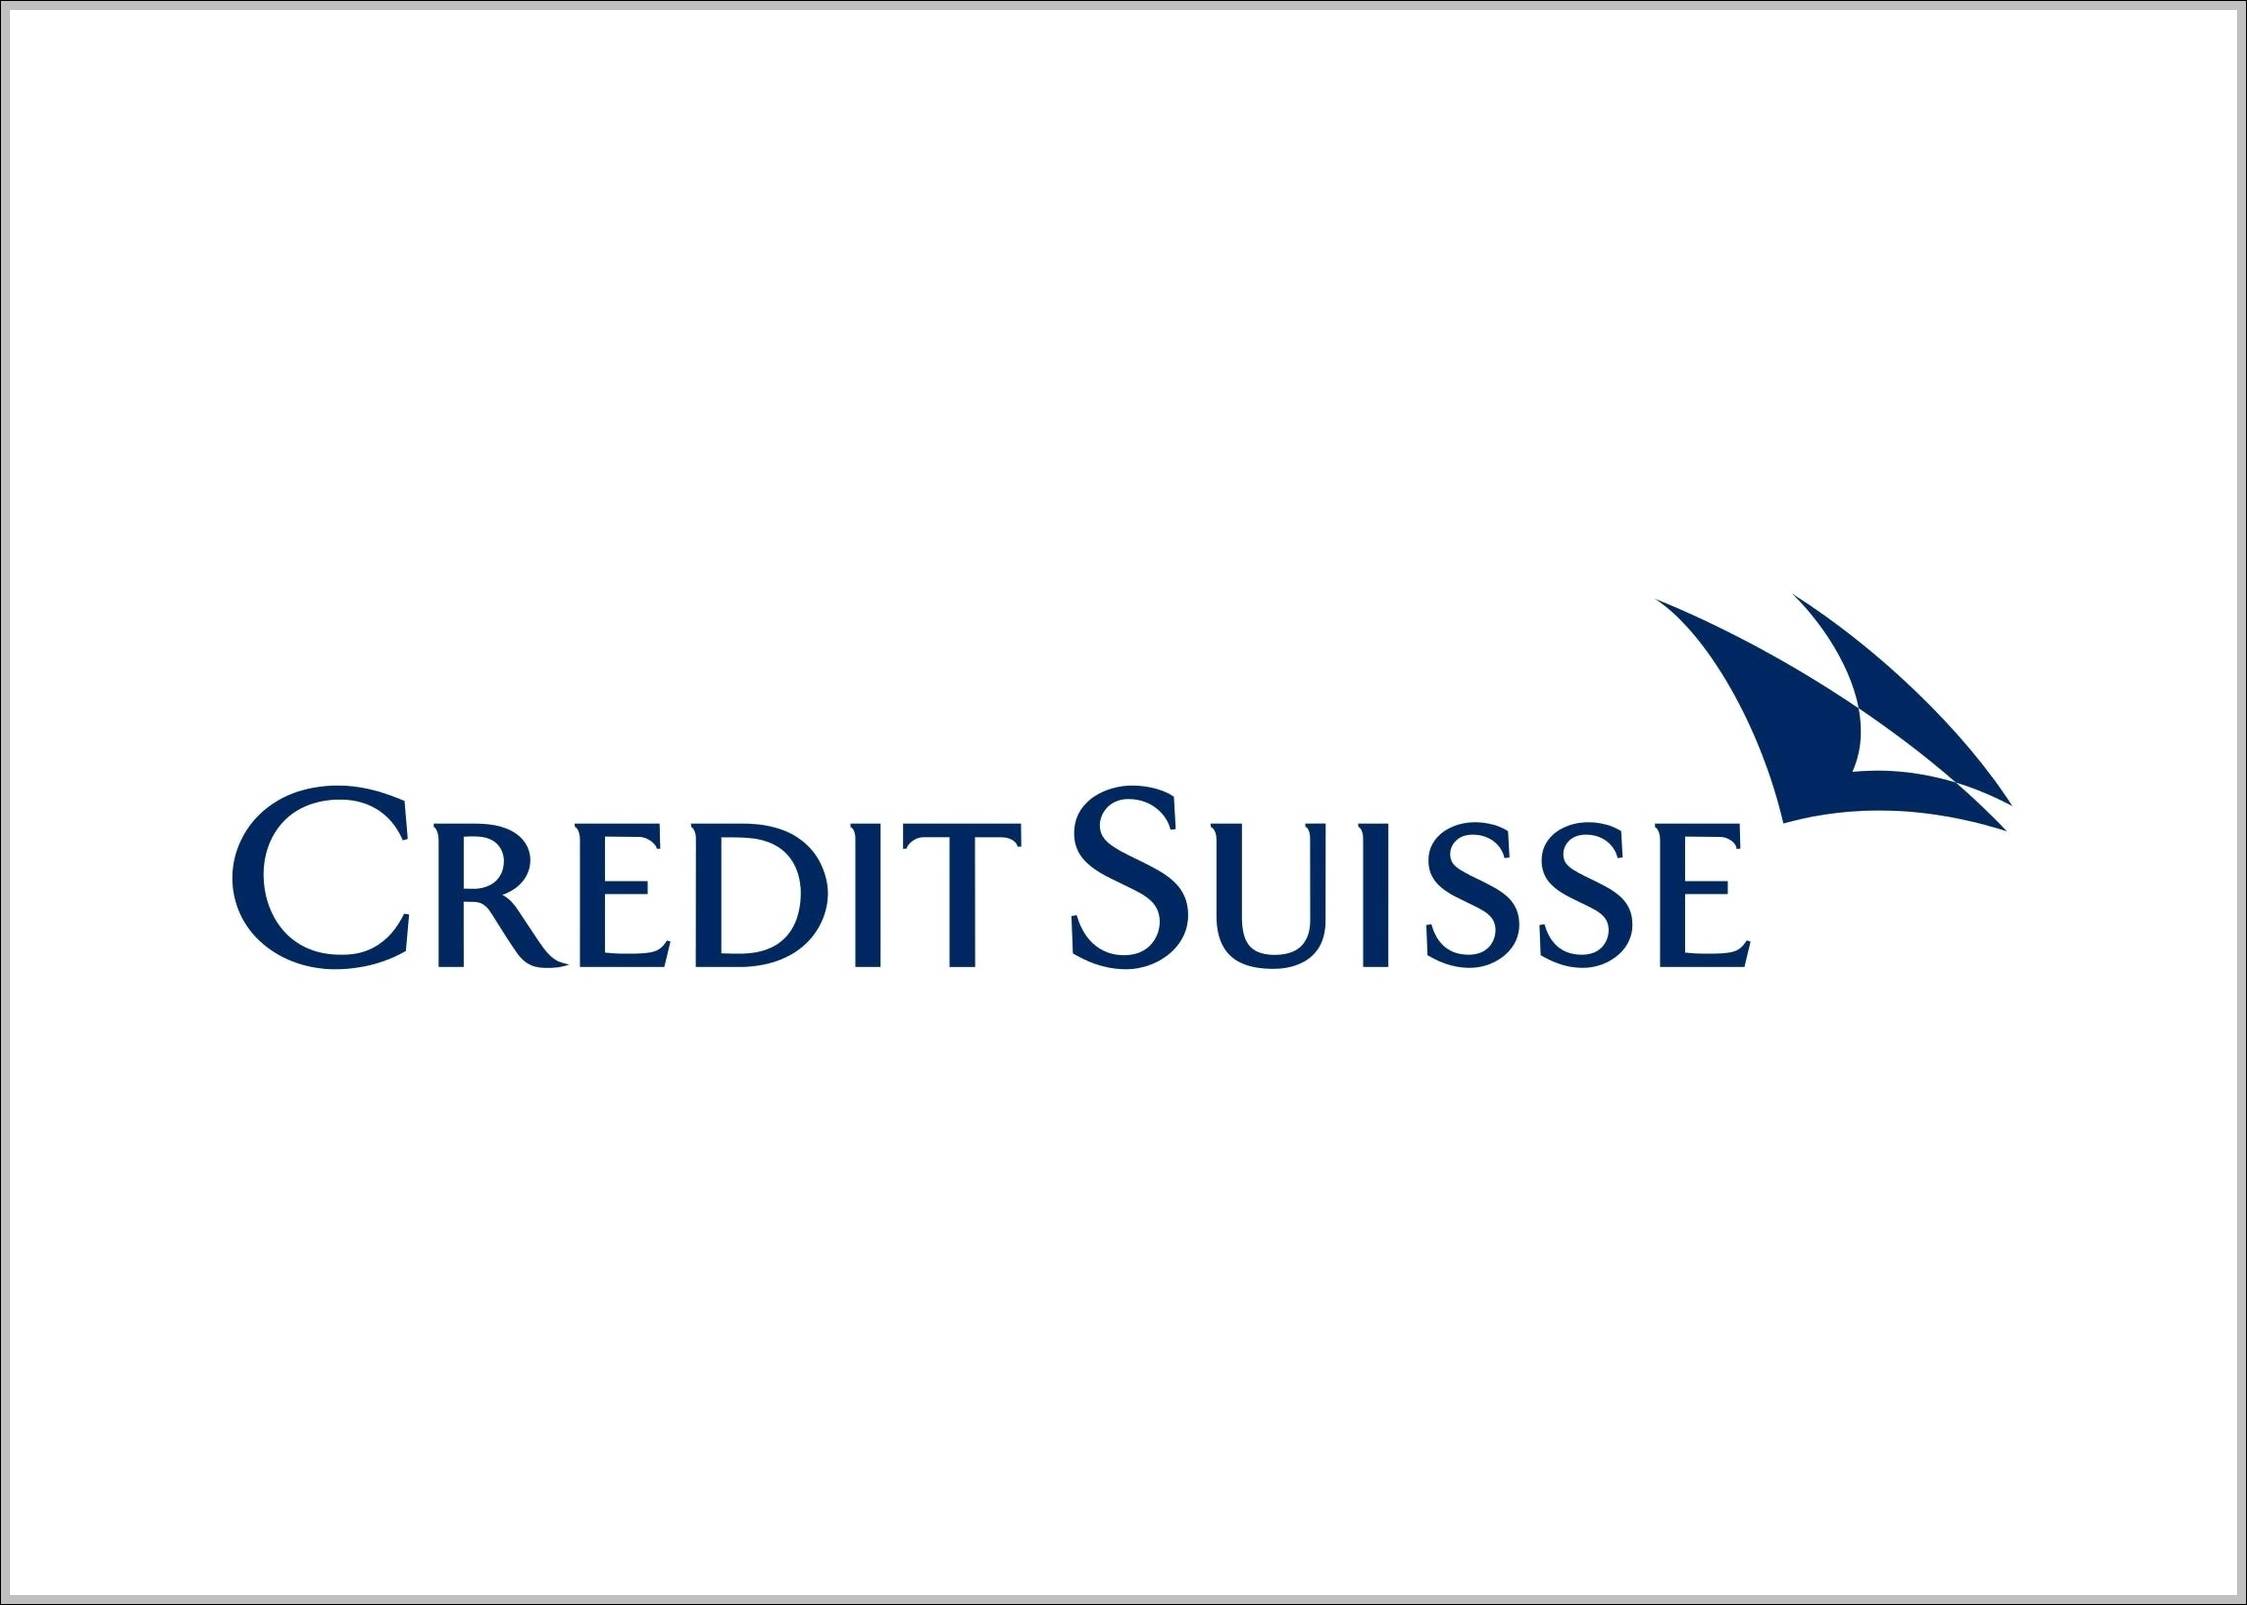 Credit Suisse logo and sign